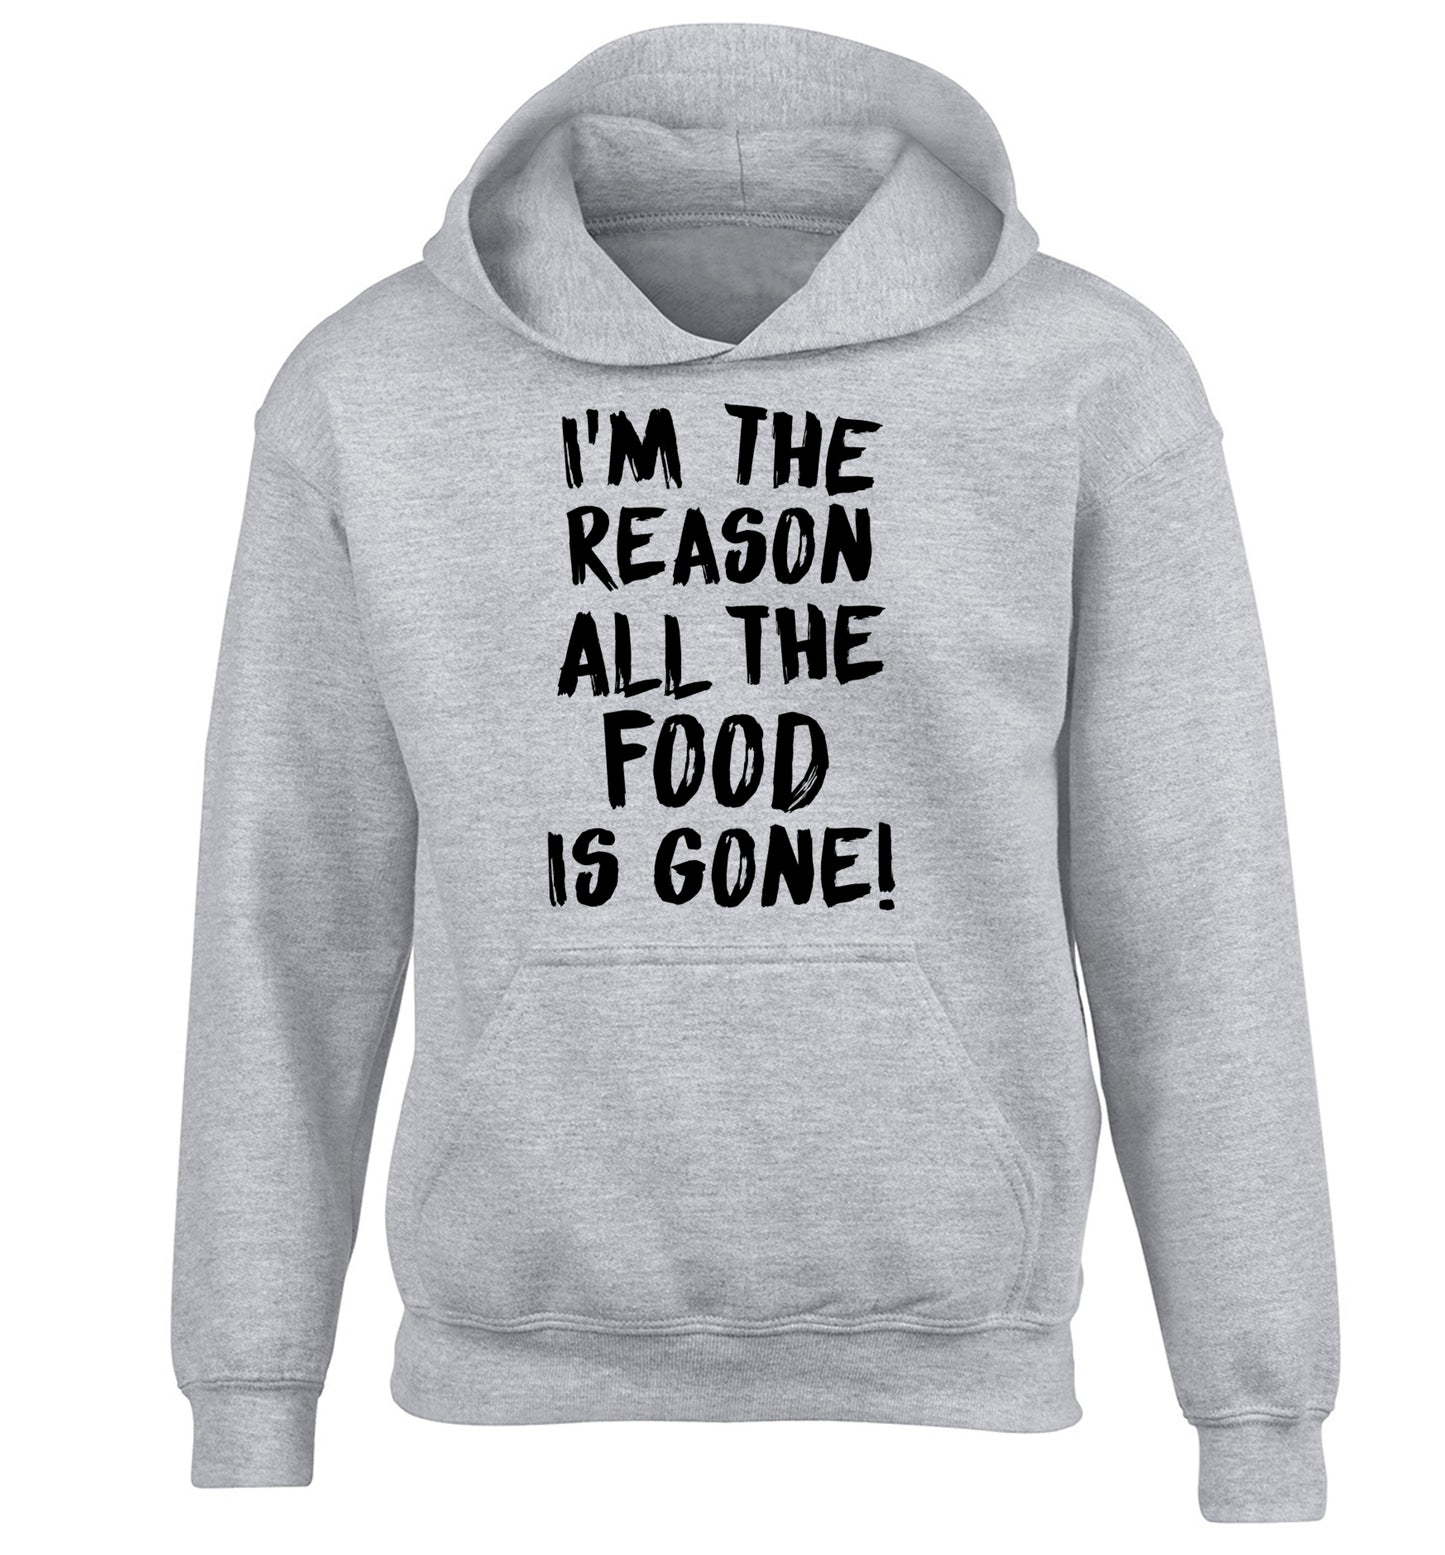 I'm the reason why all the food is gone children's grey hoodie 12-13 Years